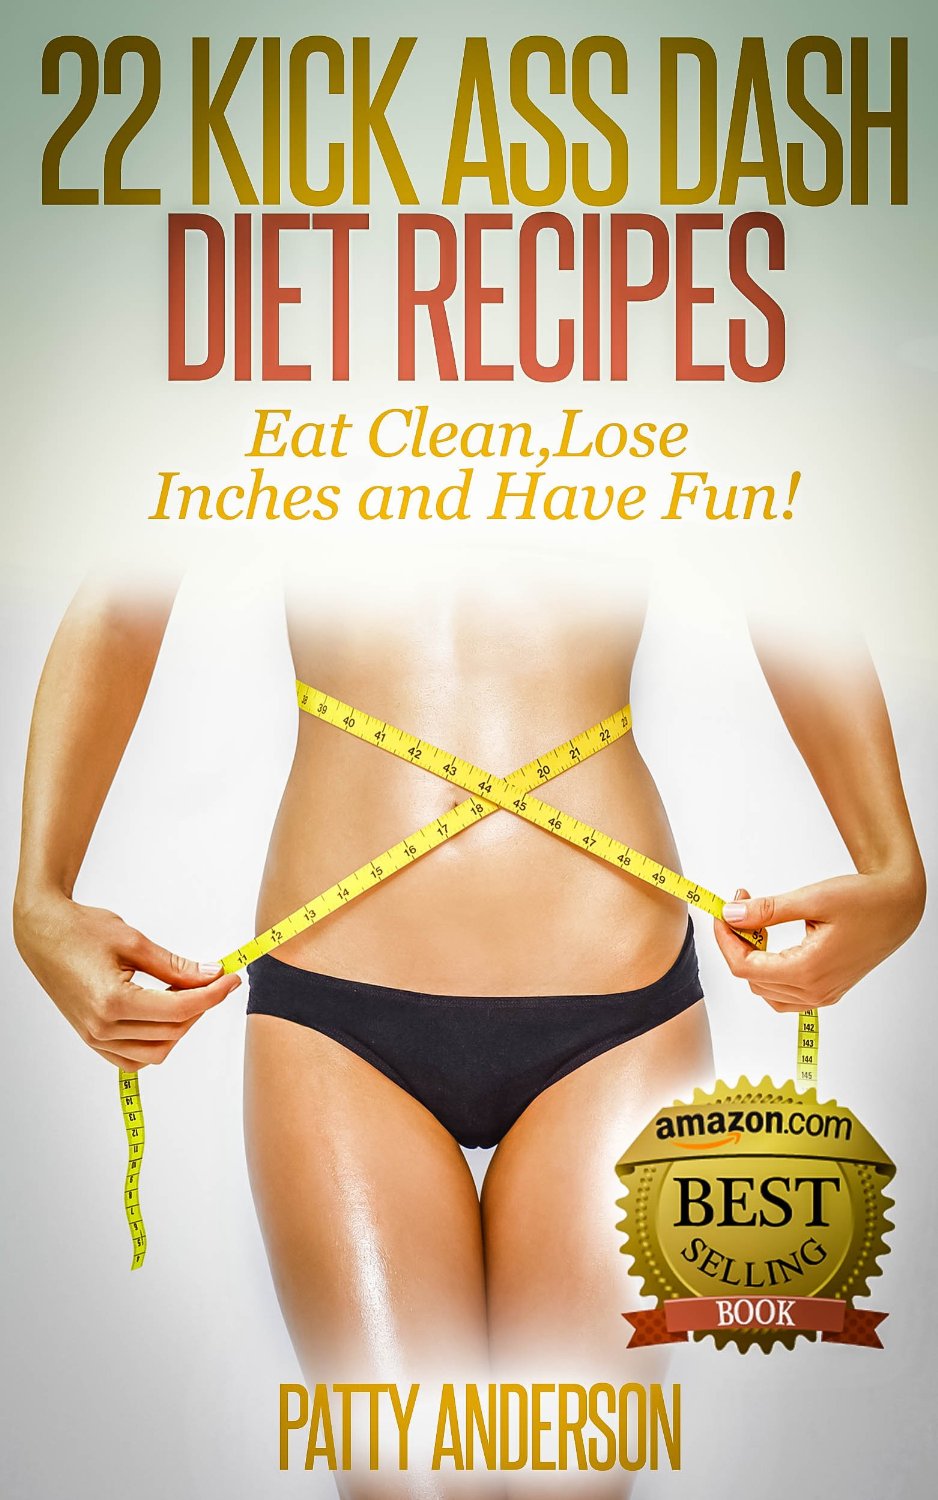 22 Kick Ass DASH Diet Recipes: Eat Clean, Lose Inches and Have Fun by Patty Anderson